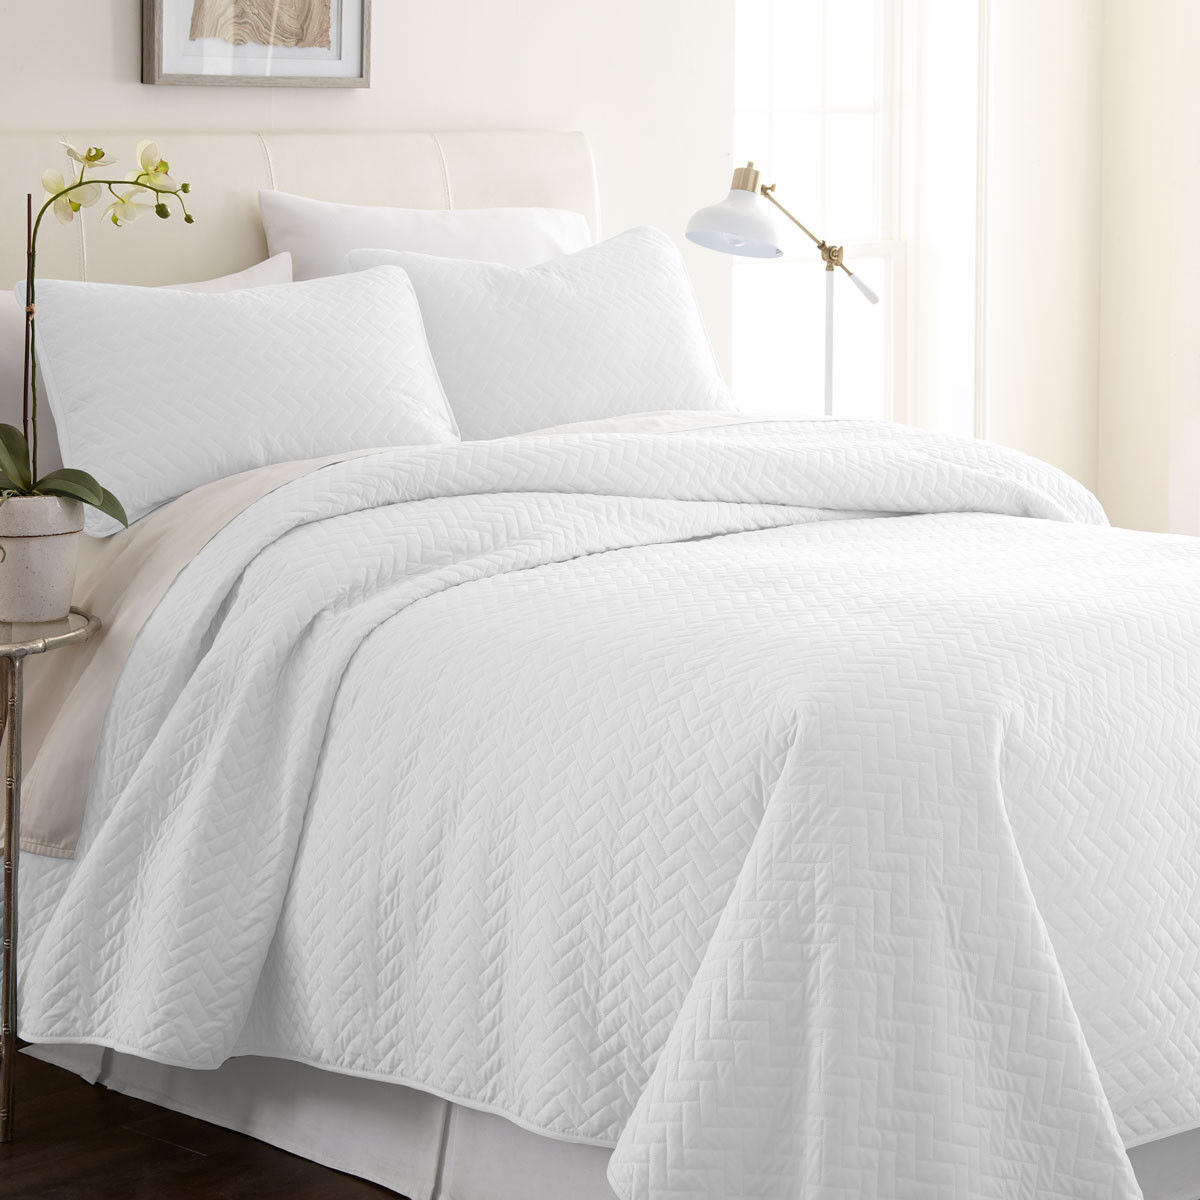 How does the woven double brushed microfiber benefit the 3-Piece Herring Quilted Coverlet Set?